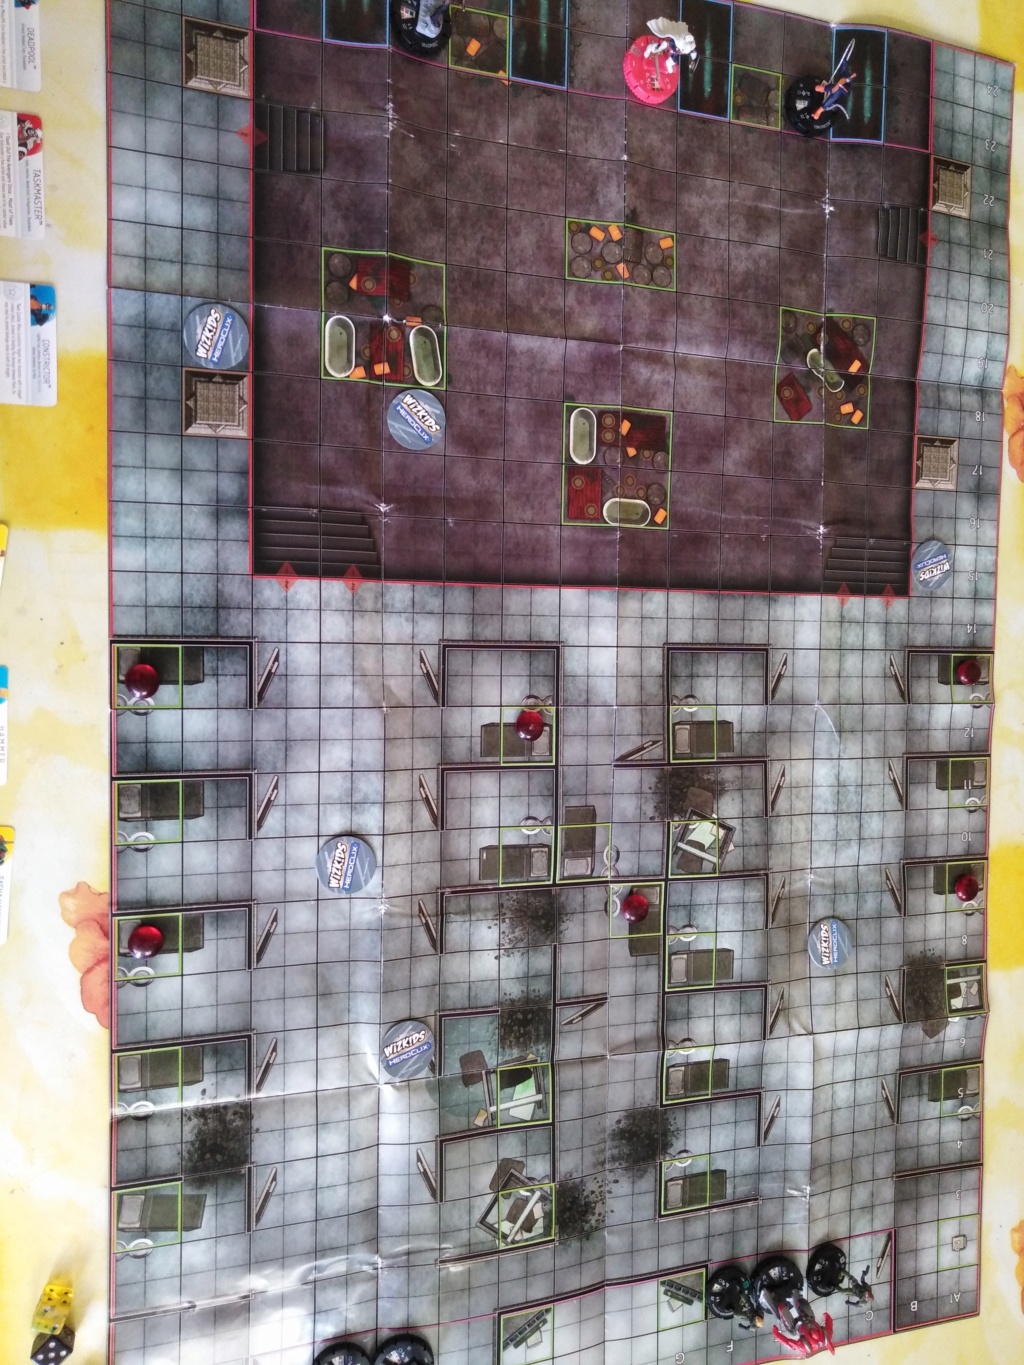 Marvelous cloberrin' day : campagne heroclix. - Page 7 Img_2667